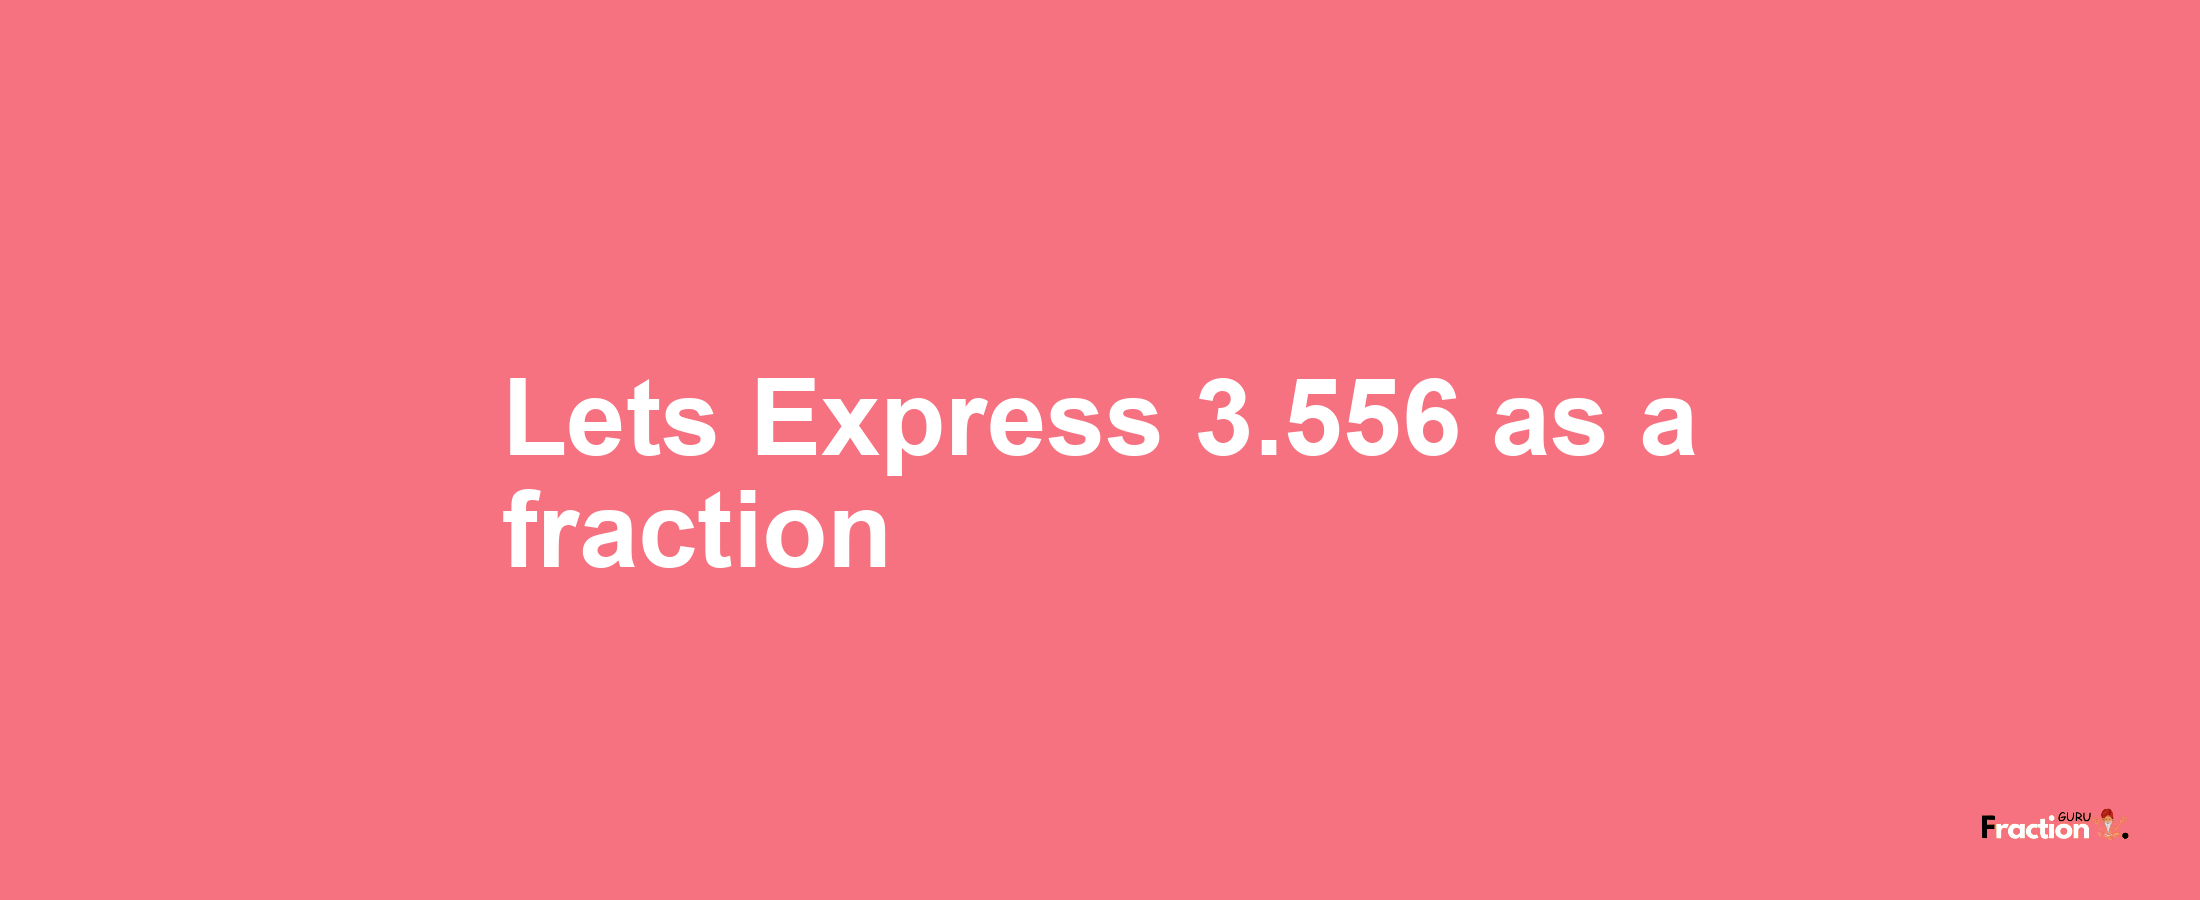 Lets Express 3.556 as afraction